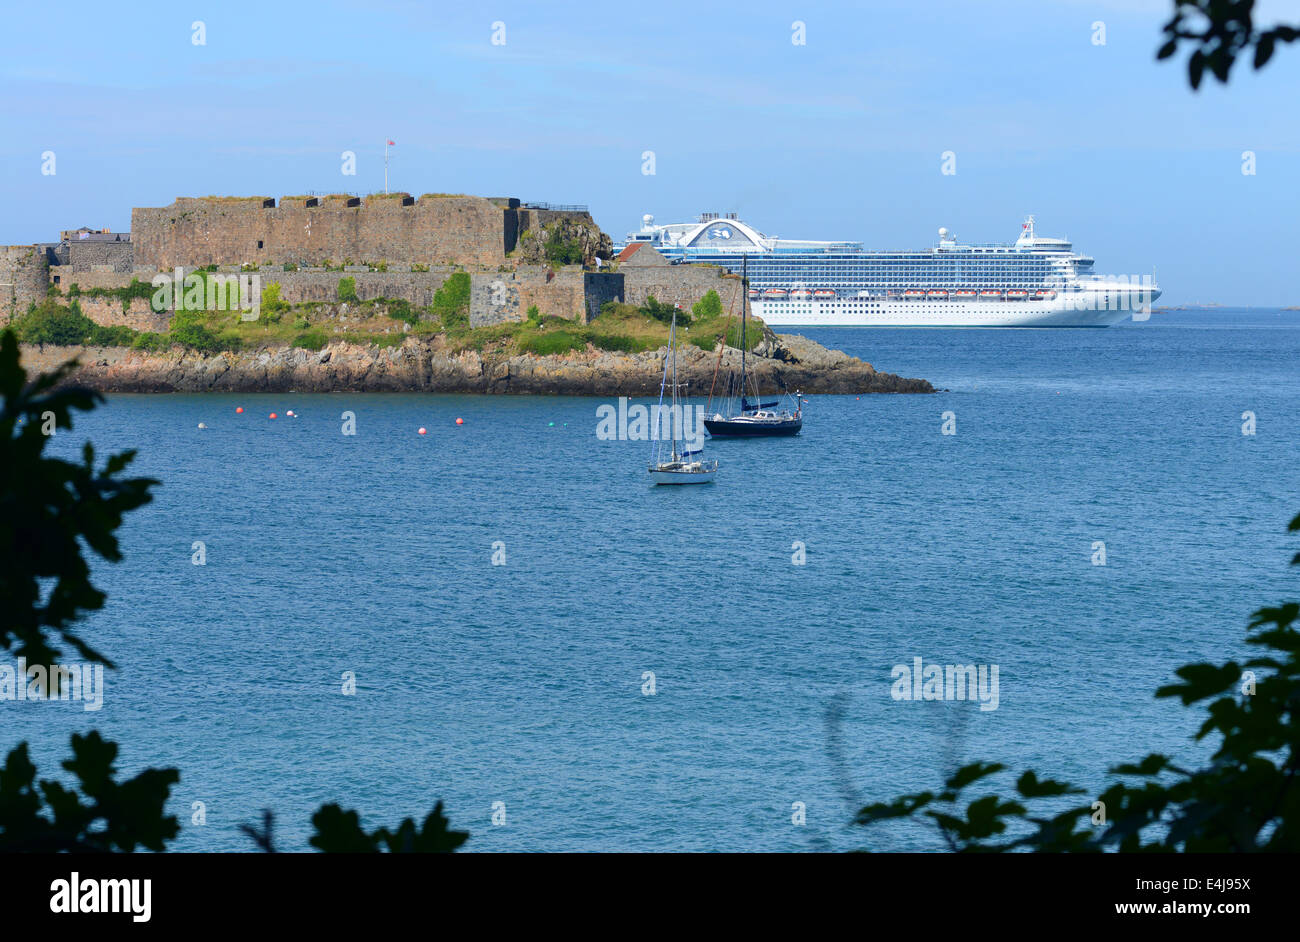 Castle Cornet in Guernsey and the Ruby Princess cruise ship moored just offshore Stock Photo